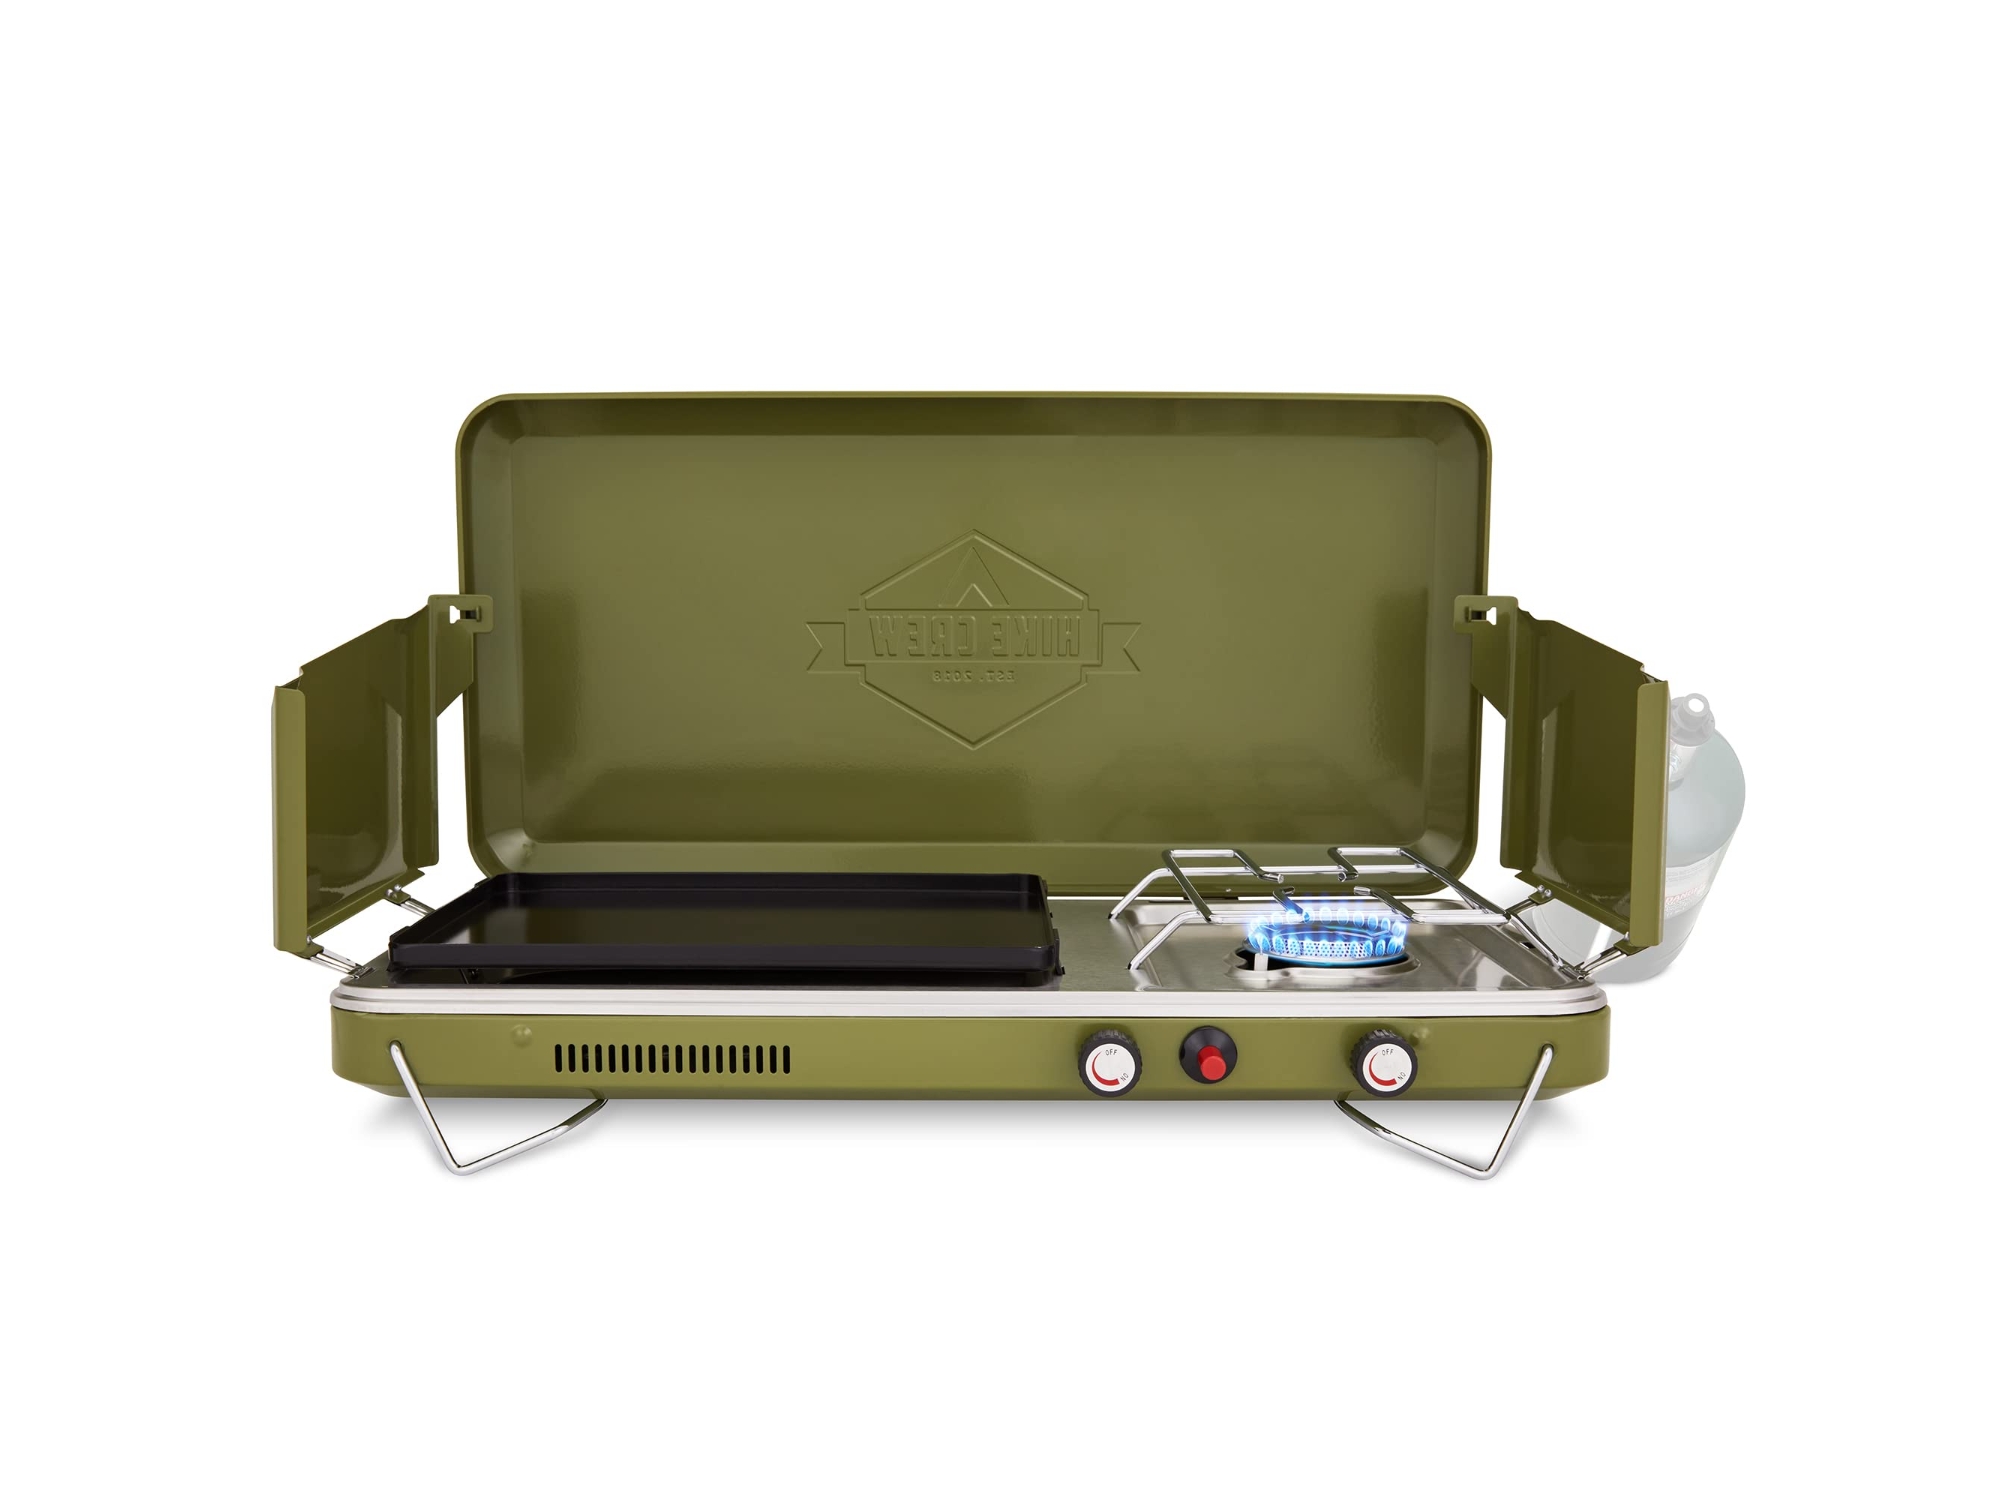 Image of Hike Crew 2-in-1 Gas Camping Stove Portable Grill Propane Burner Green ID 843812161862